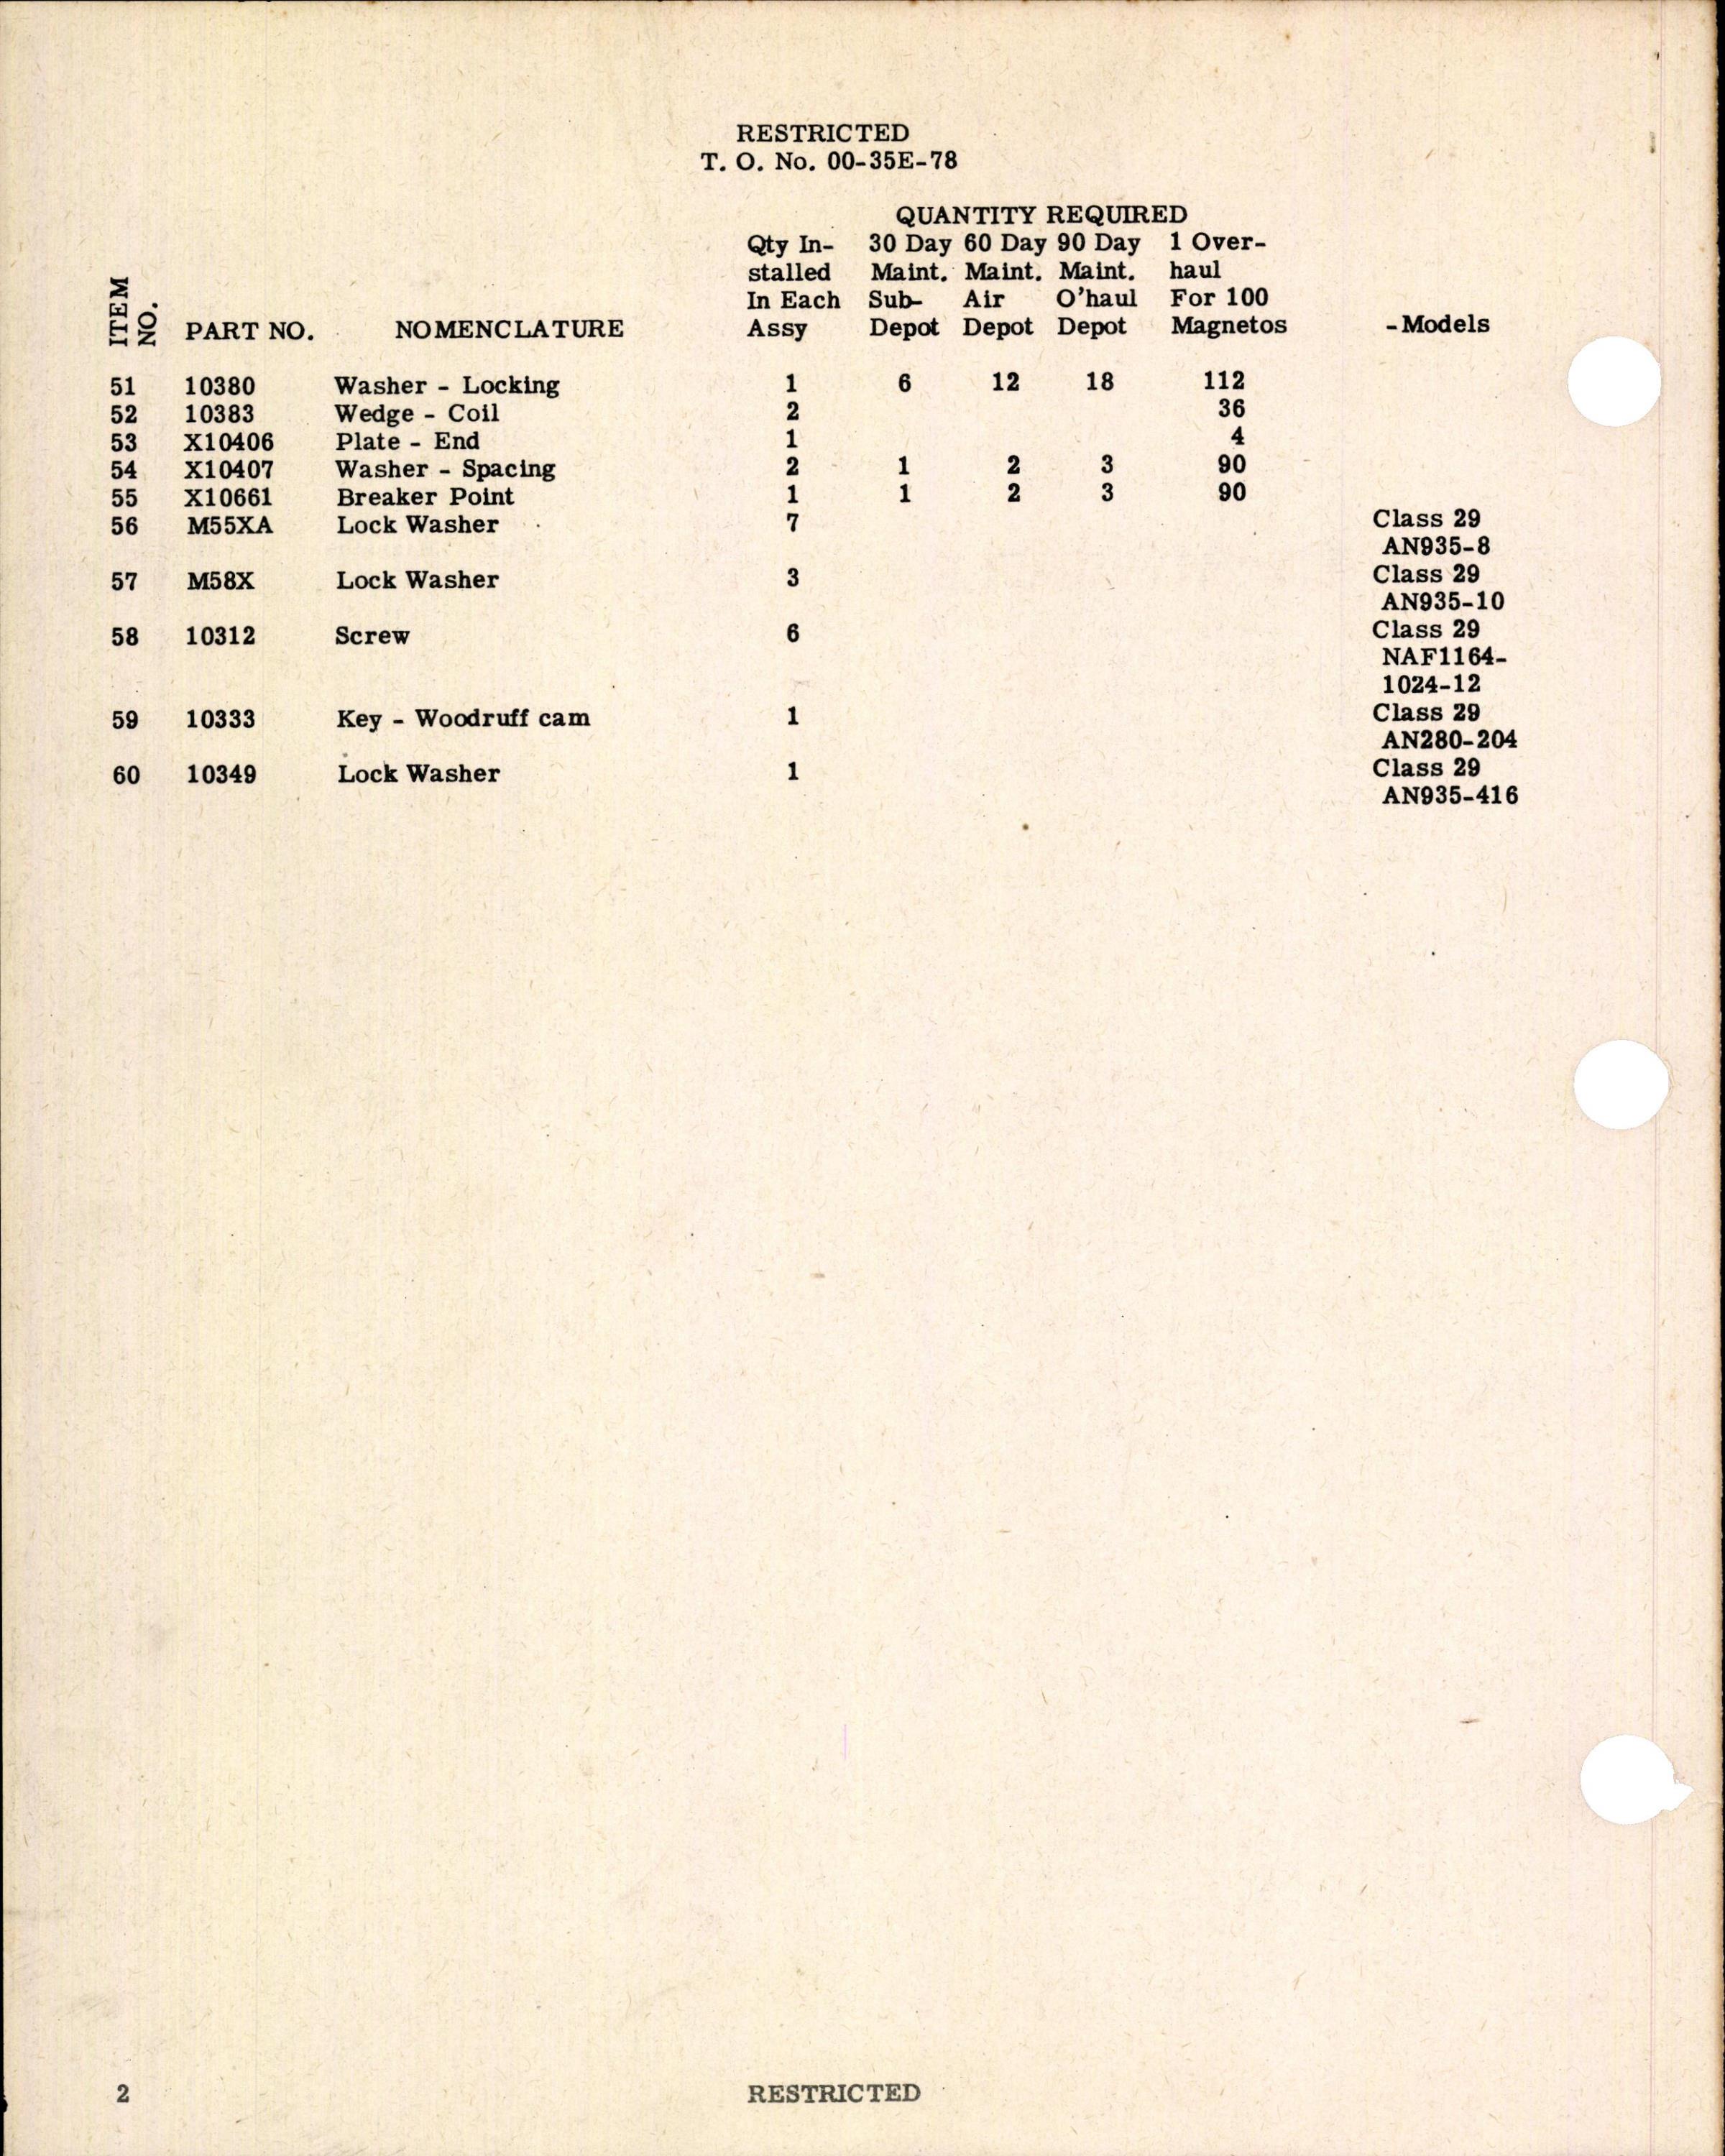 Sample page 4 from AirCorps Library document: Table of Credit - Maintenance & Overhaul for Wico Magneto